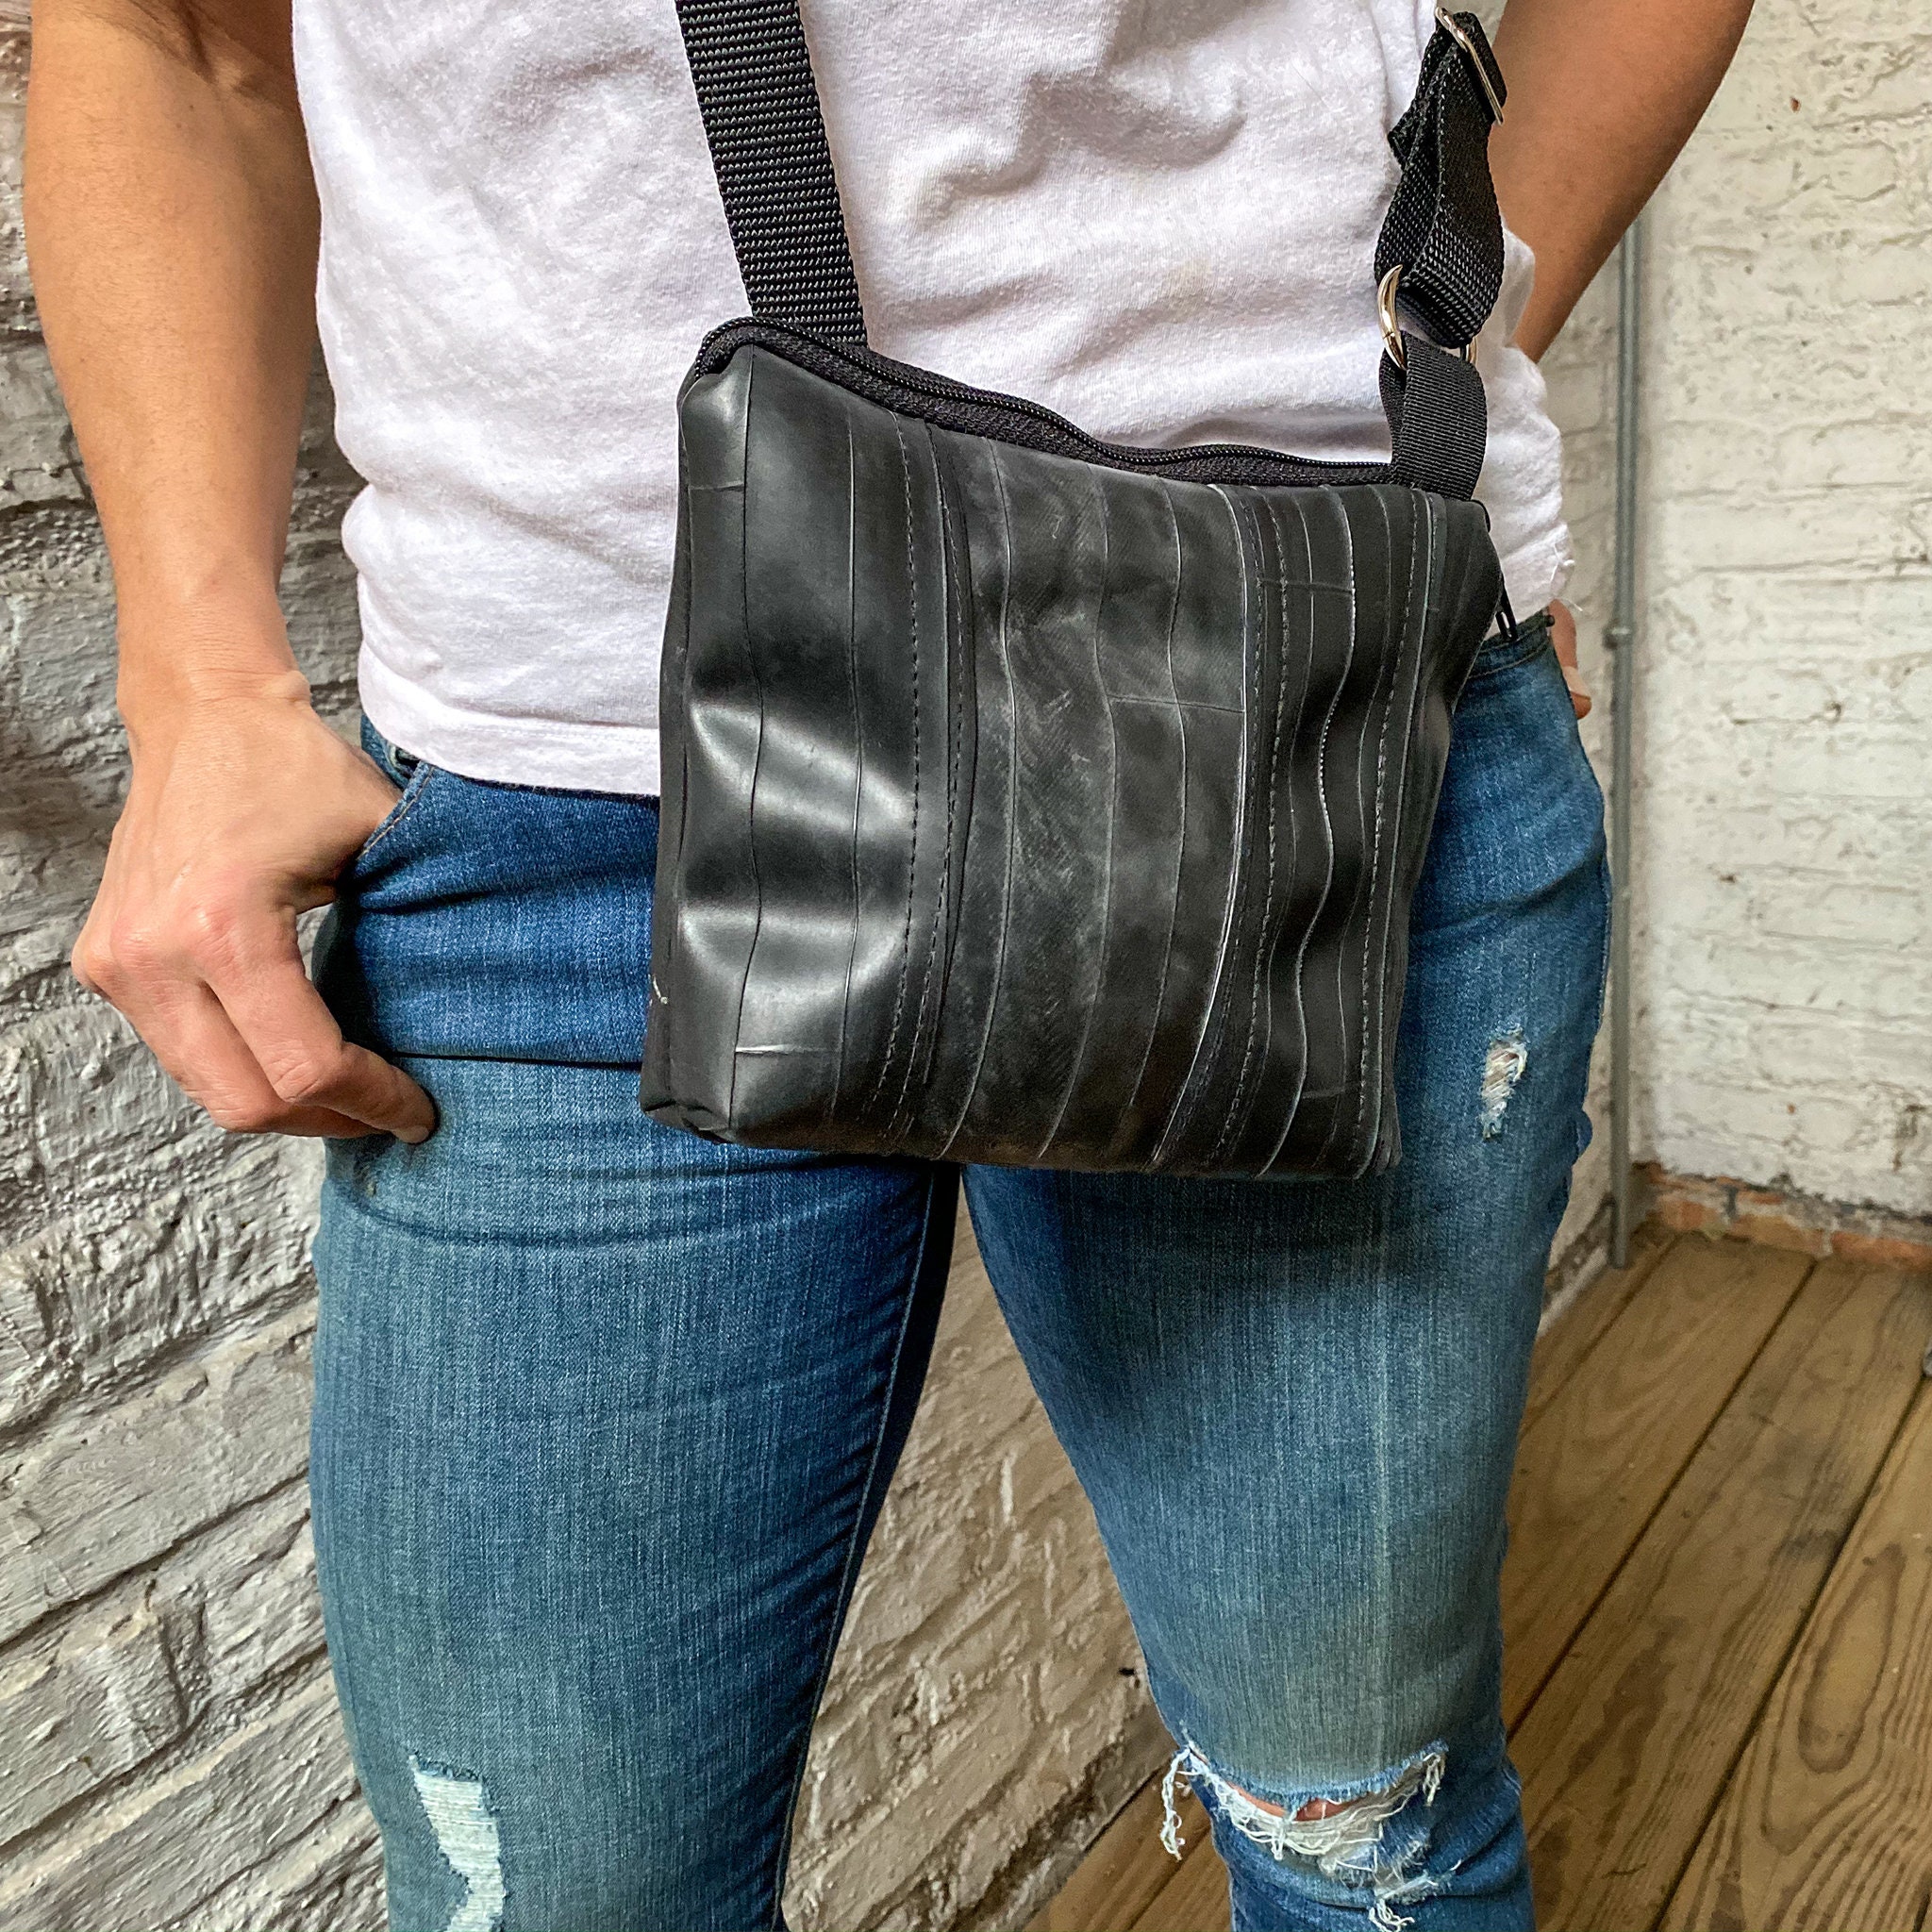 Men's Tote With Expandable Design, Recycled Tire Tube Bag